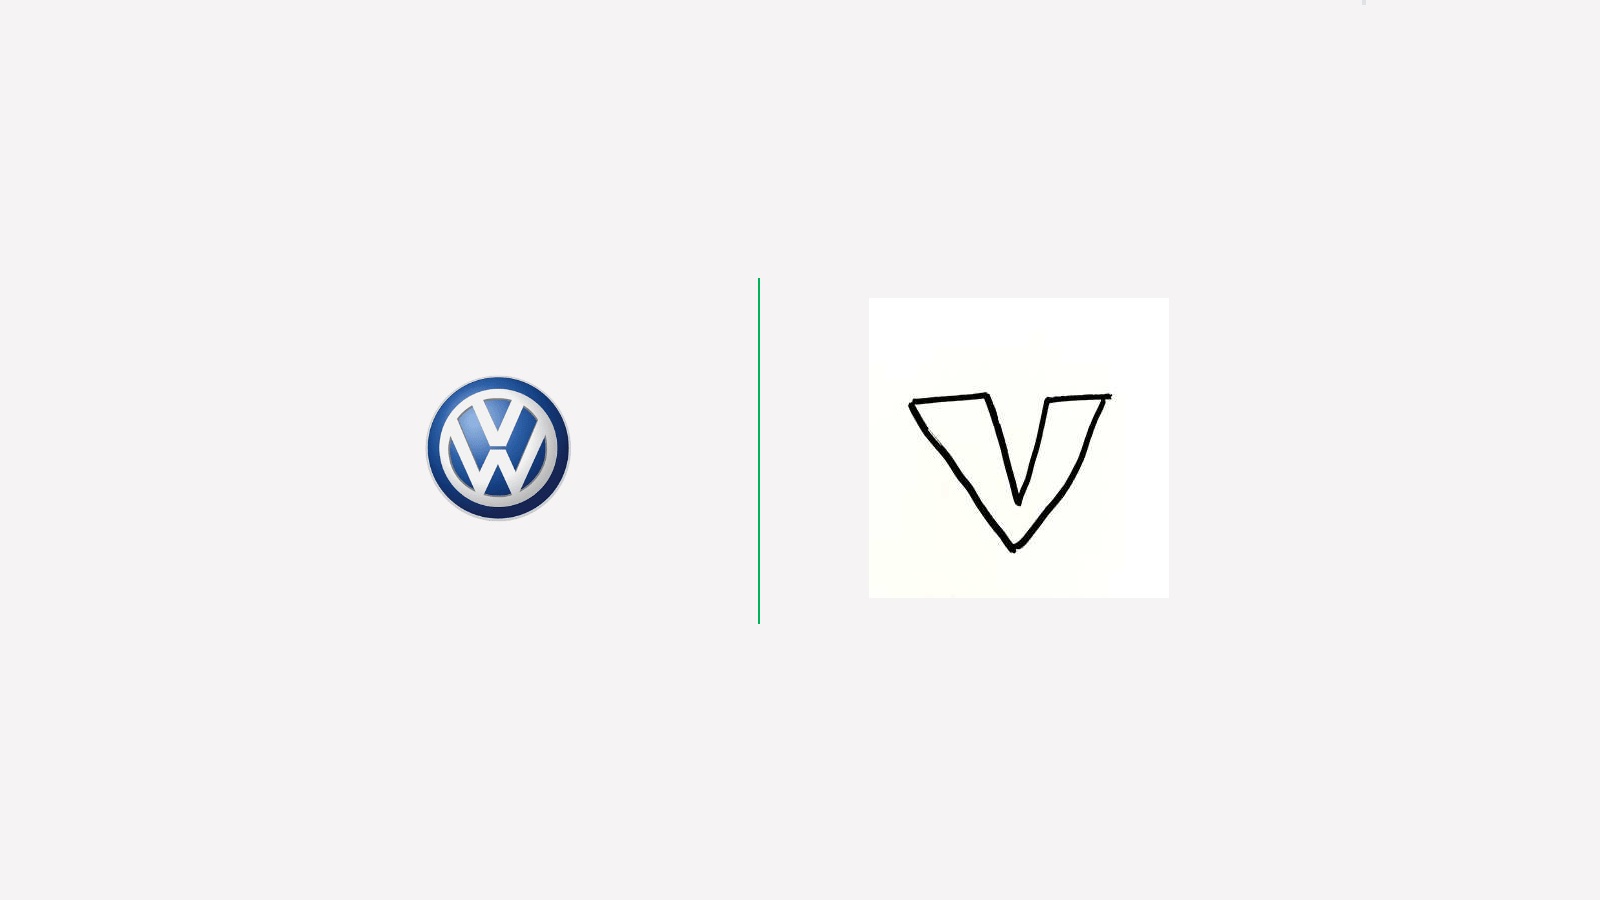 How Accurately Can You Draw a Car Logo from Memory?